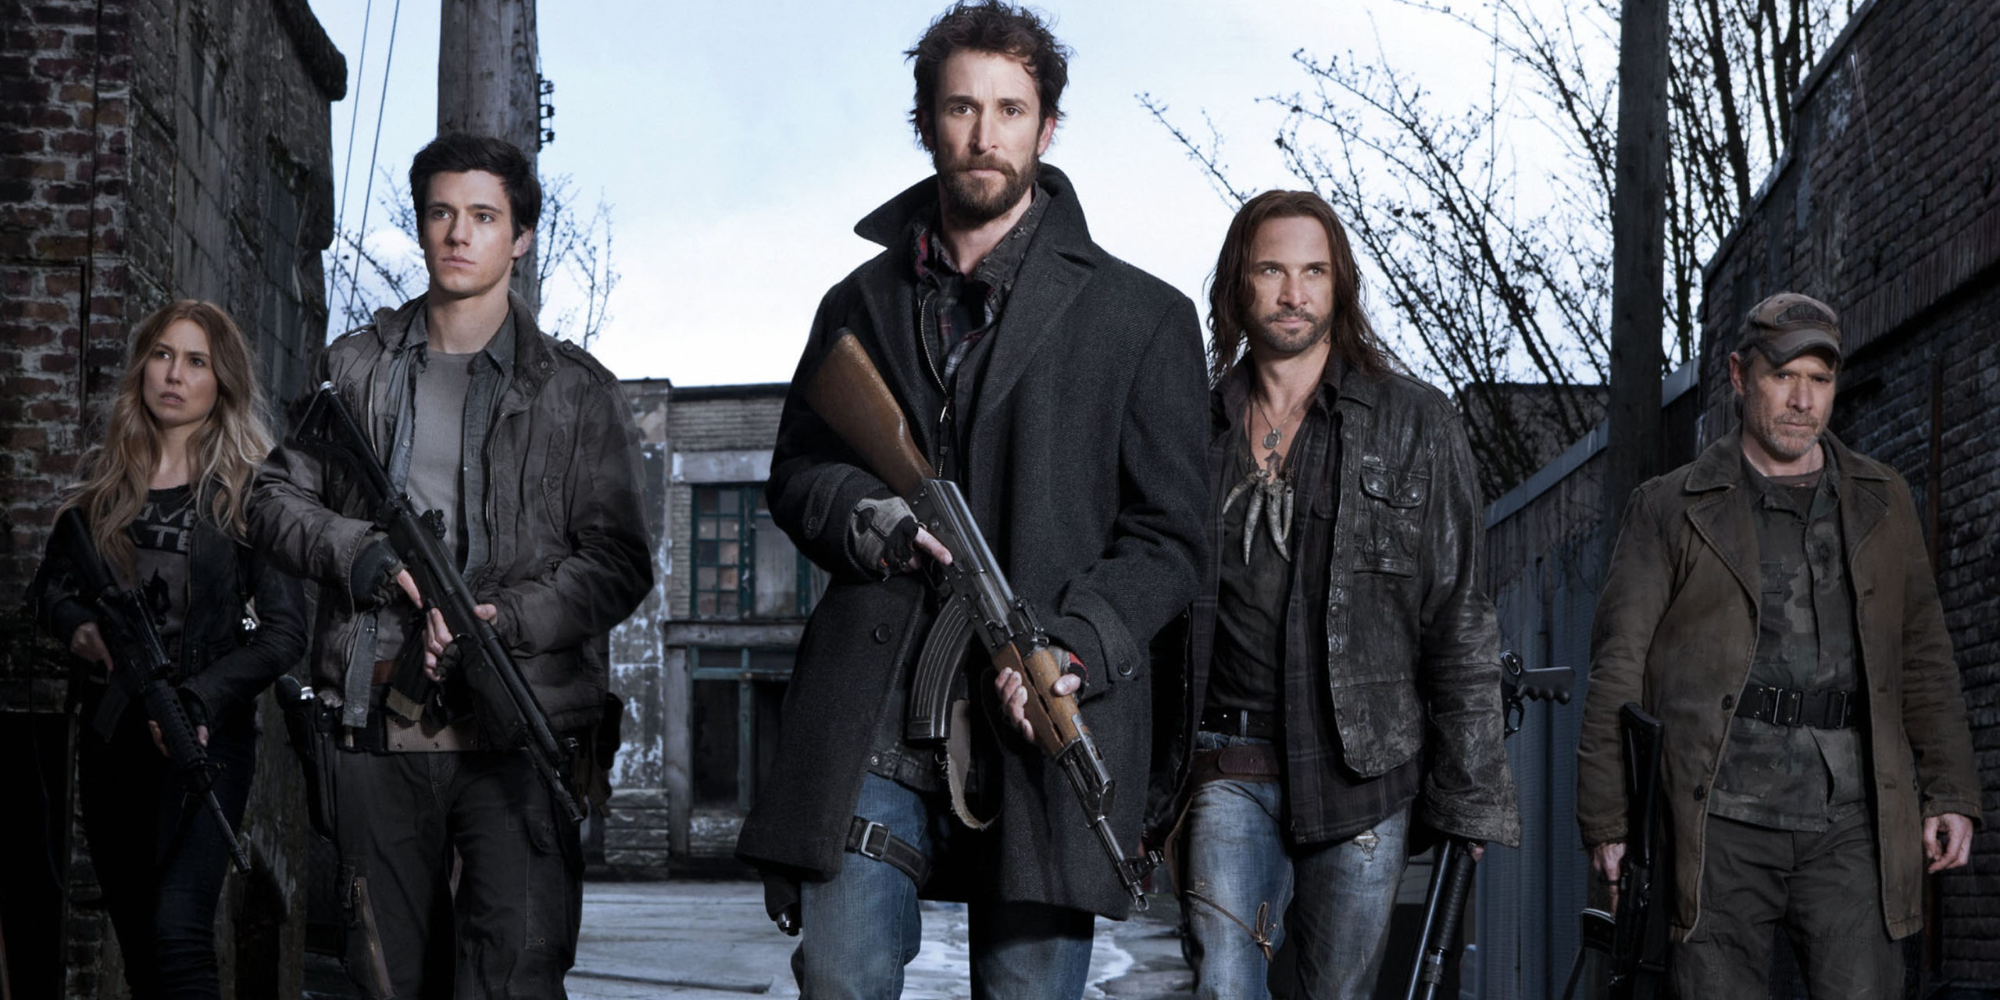 falling-skies main cast walk down an alleyway with weapons